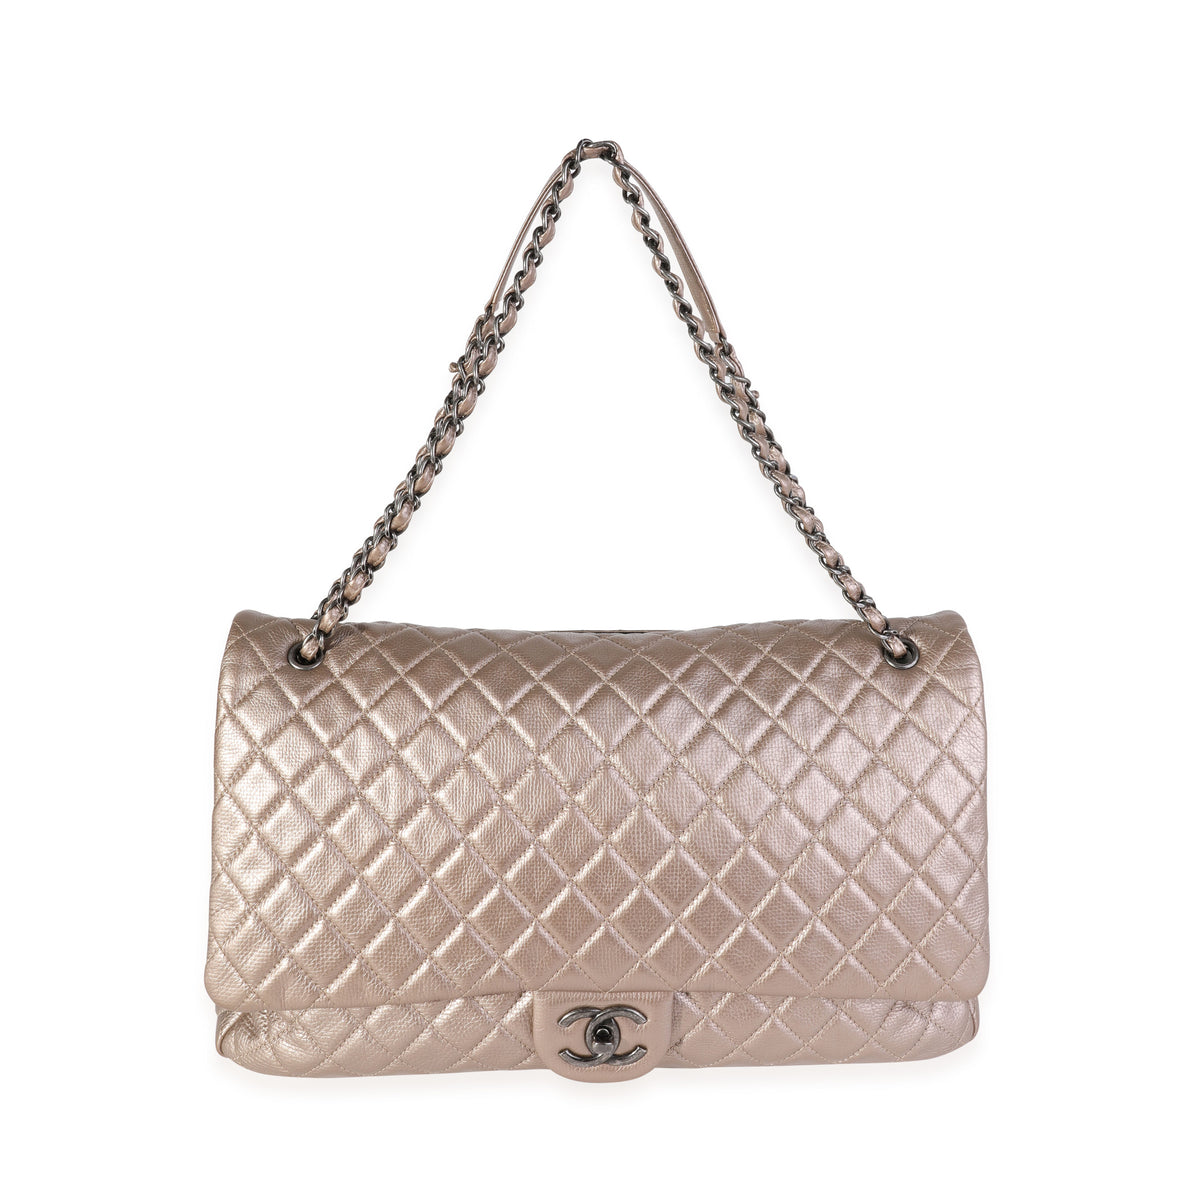 Chanel Metallic Gold Quilted Calfskin Chanel Airlines XXL Travel Flap Bag, myGemma, CA